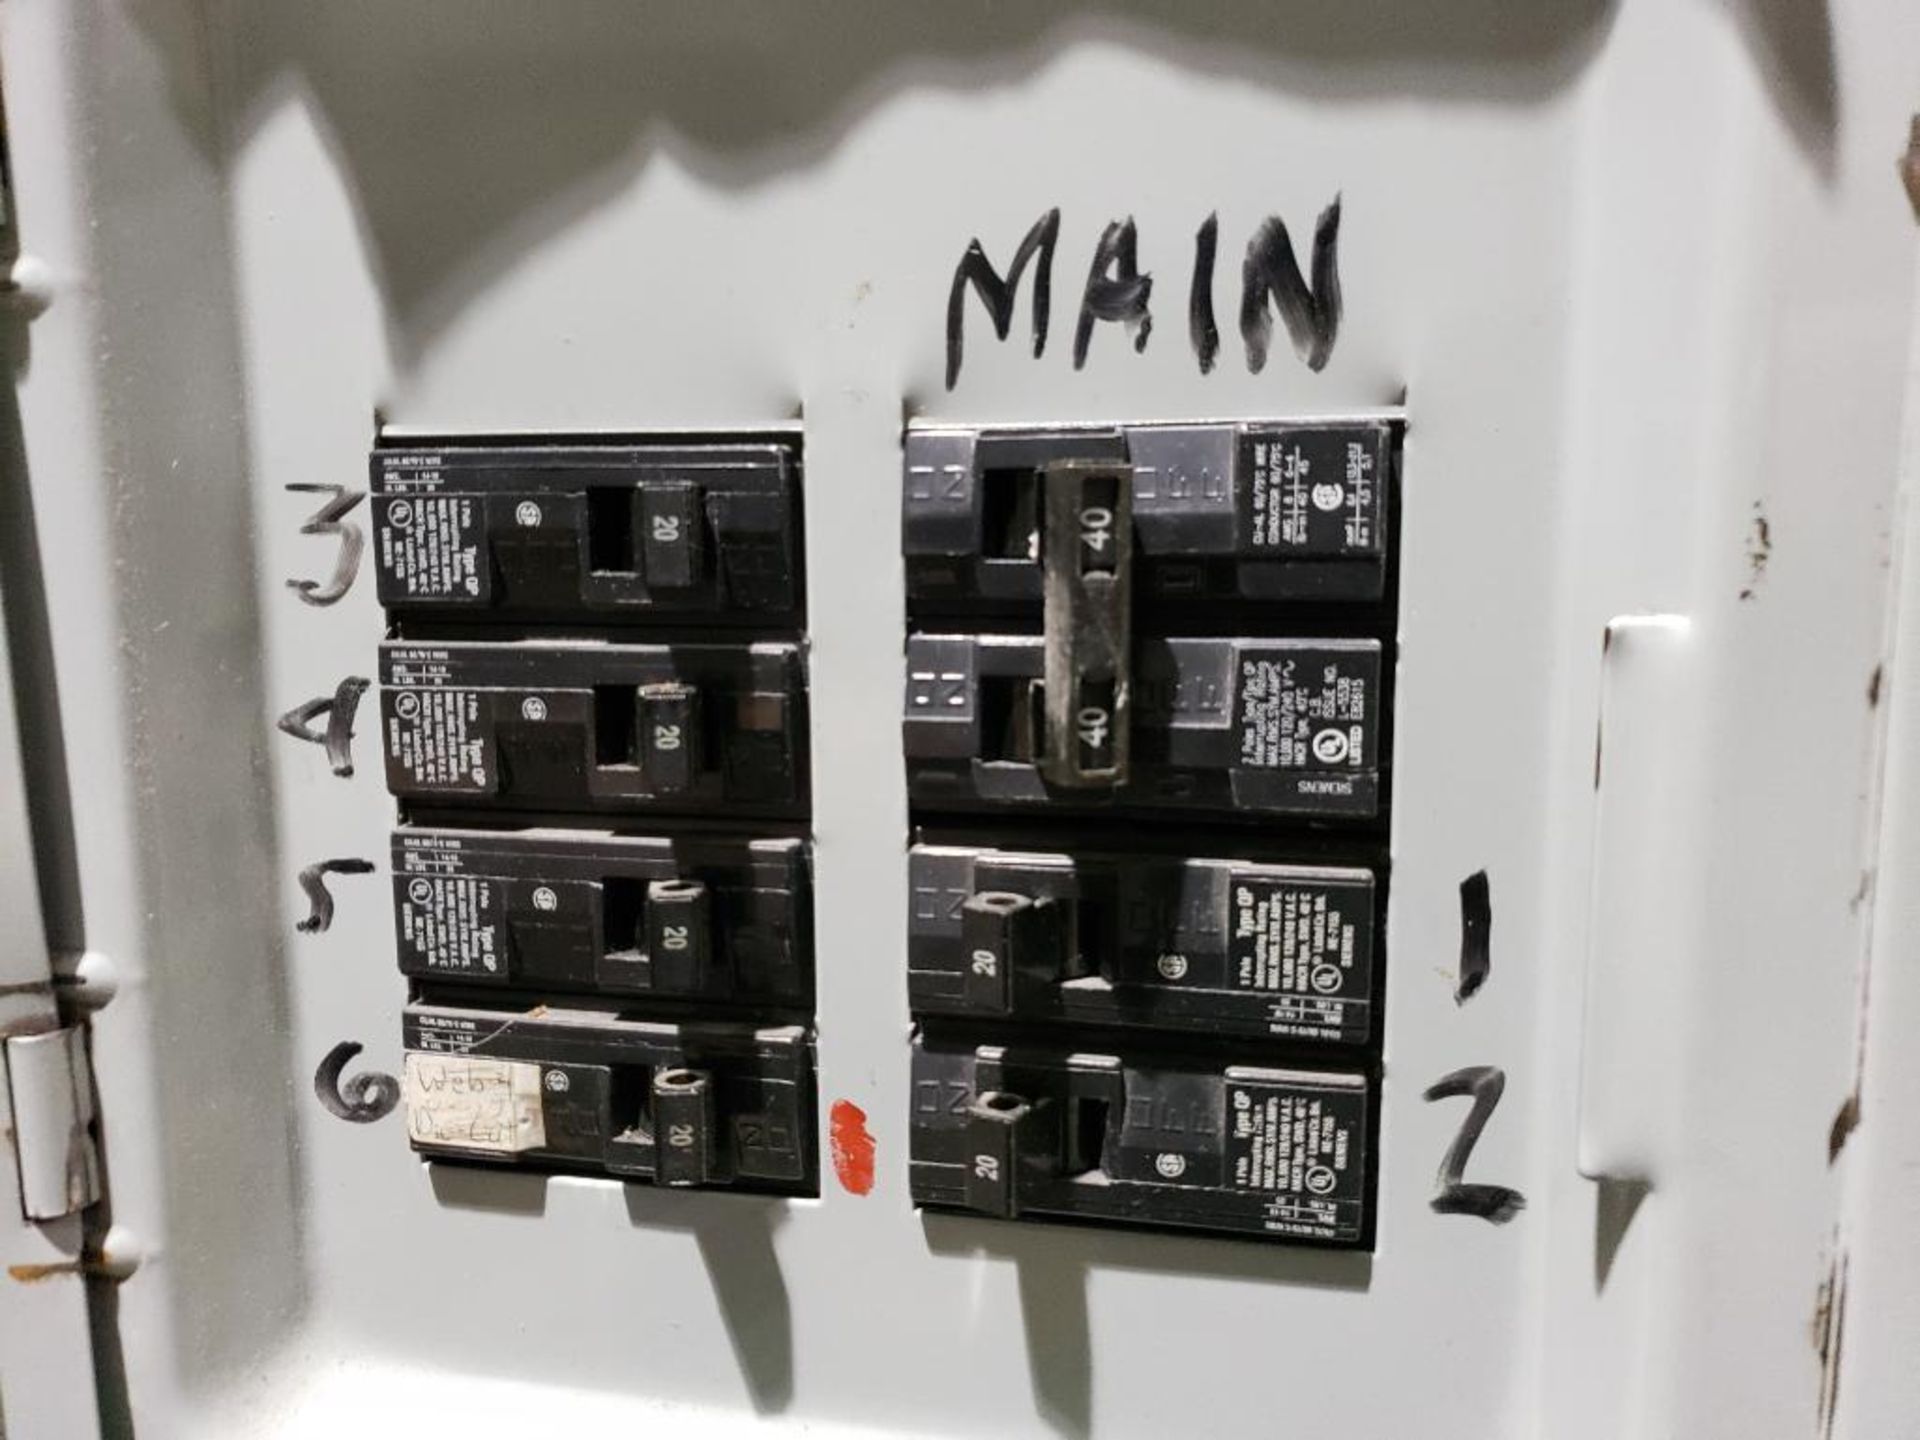 Sub panel with Siemens breaker box and assorted plugs and GE transformer. - Image 2 of 9